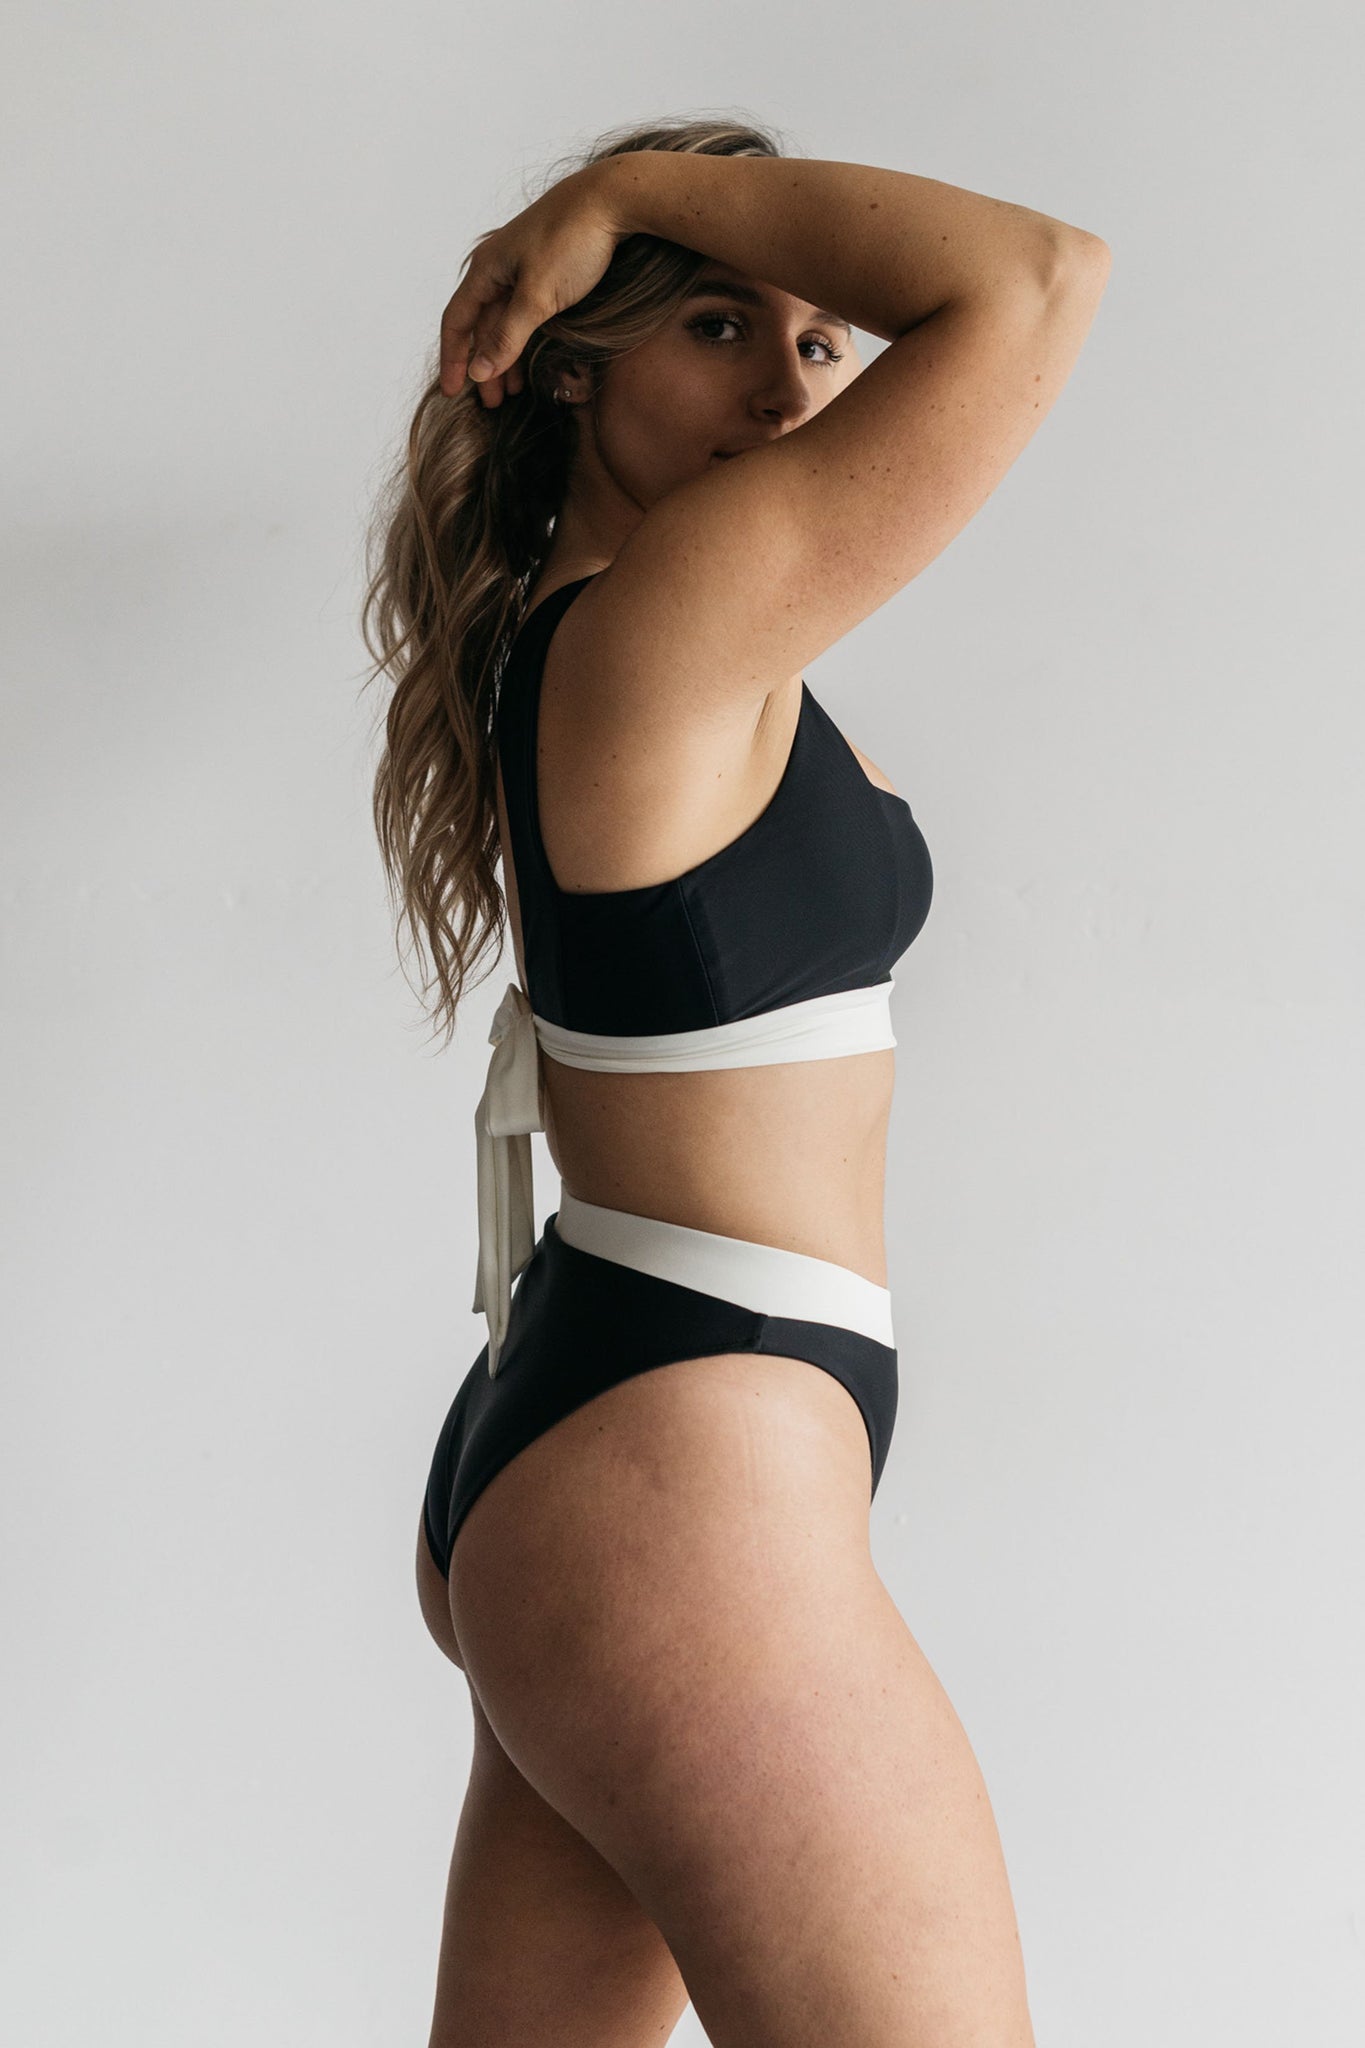 The side profile of a woman standing with one hand in her hair wearing high waisted black and white bikini bottoms with a matching black and white bikini top.